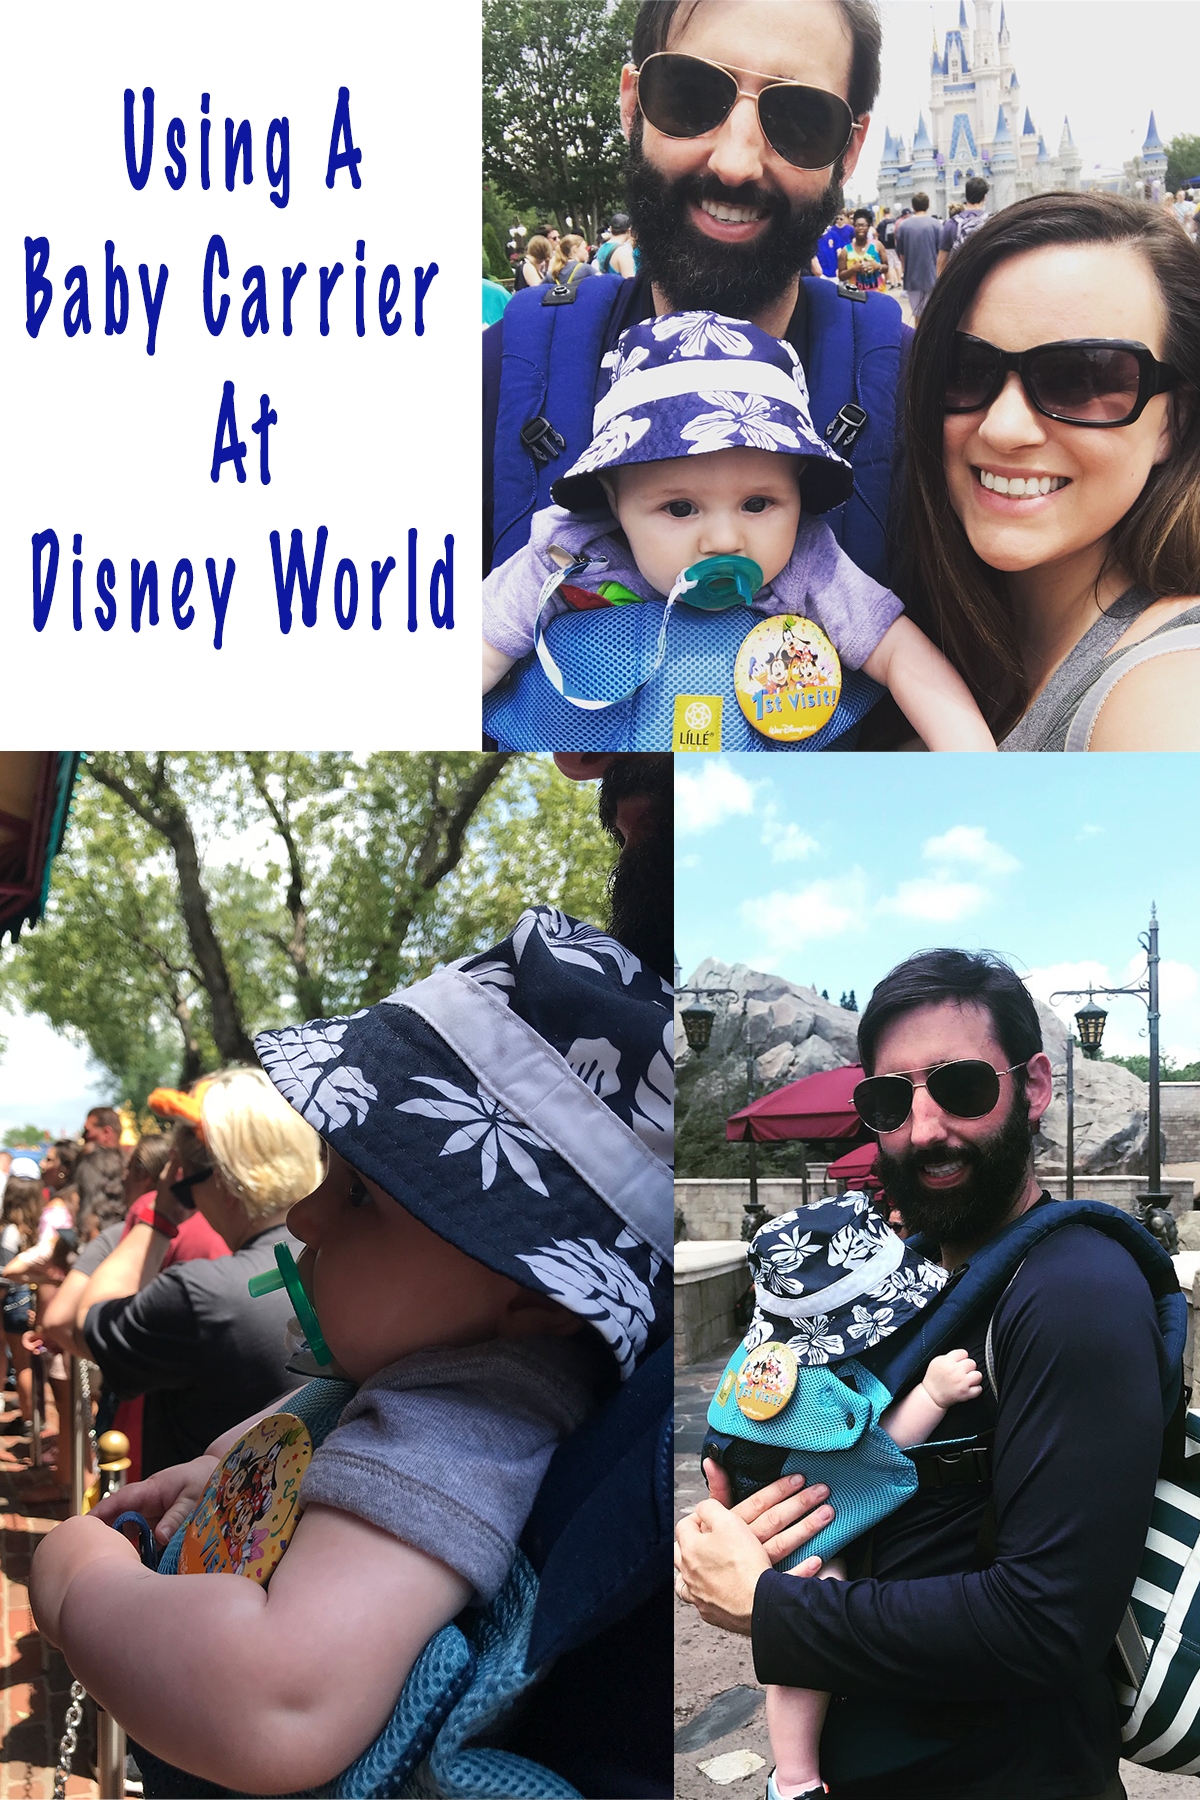 Baby Carrier At Disney World